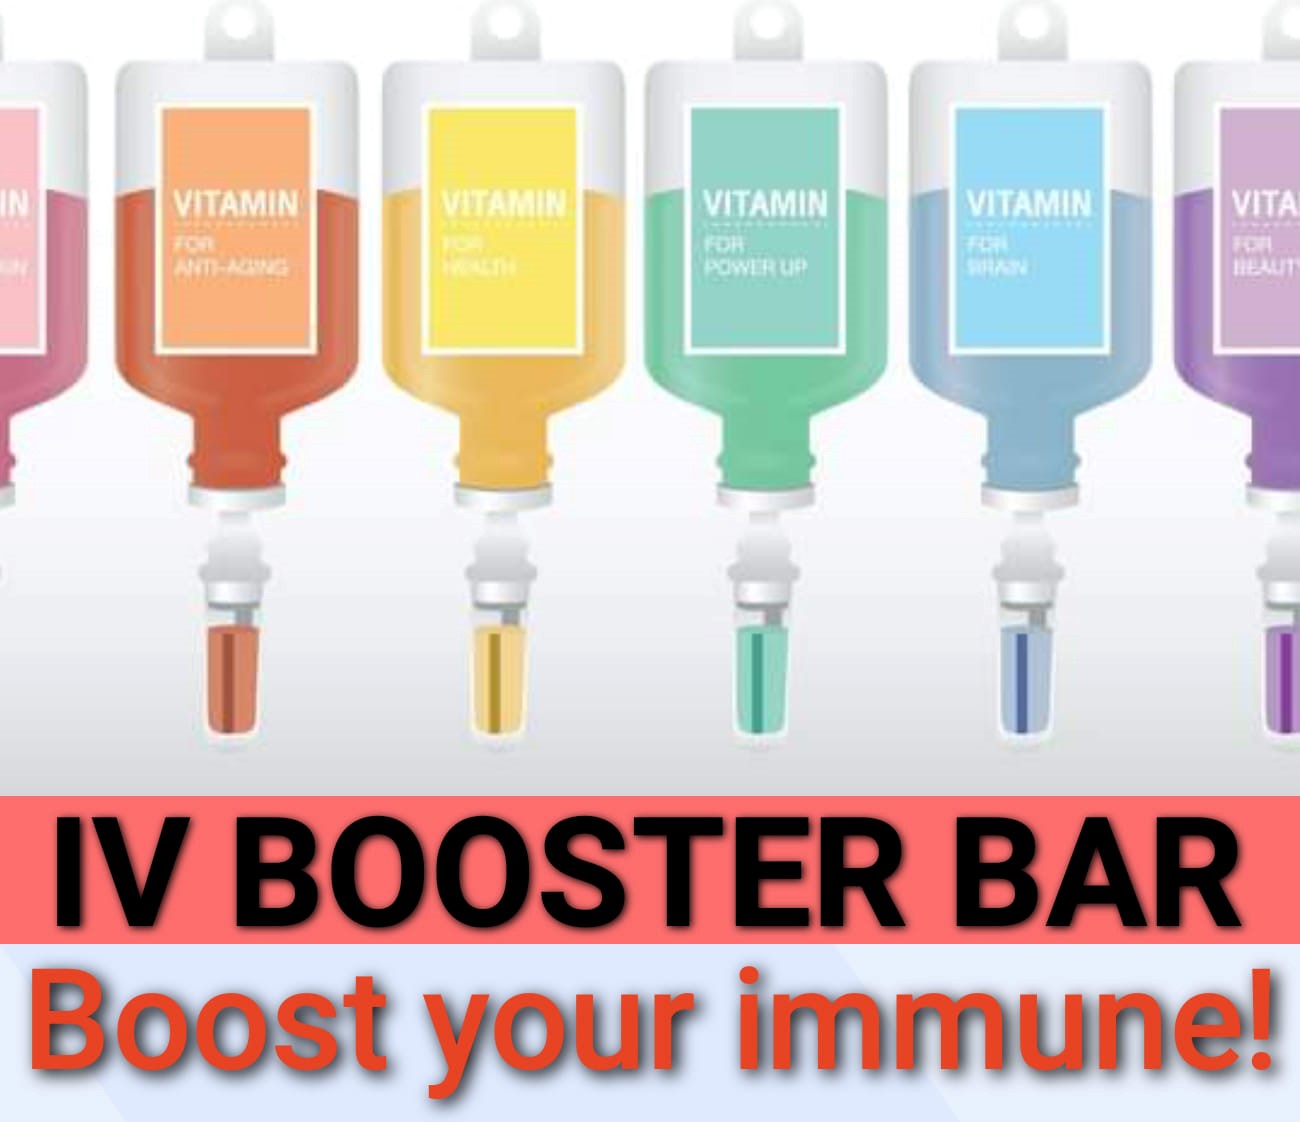 IV Booster Bar and Medical Centre 1